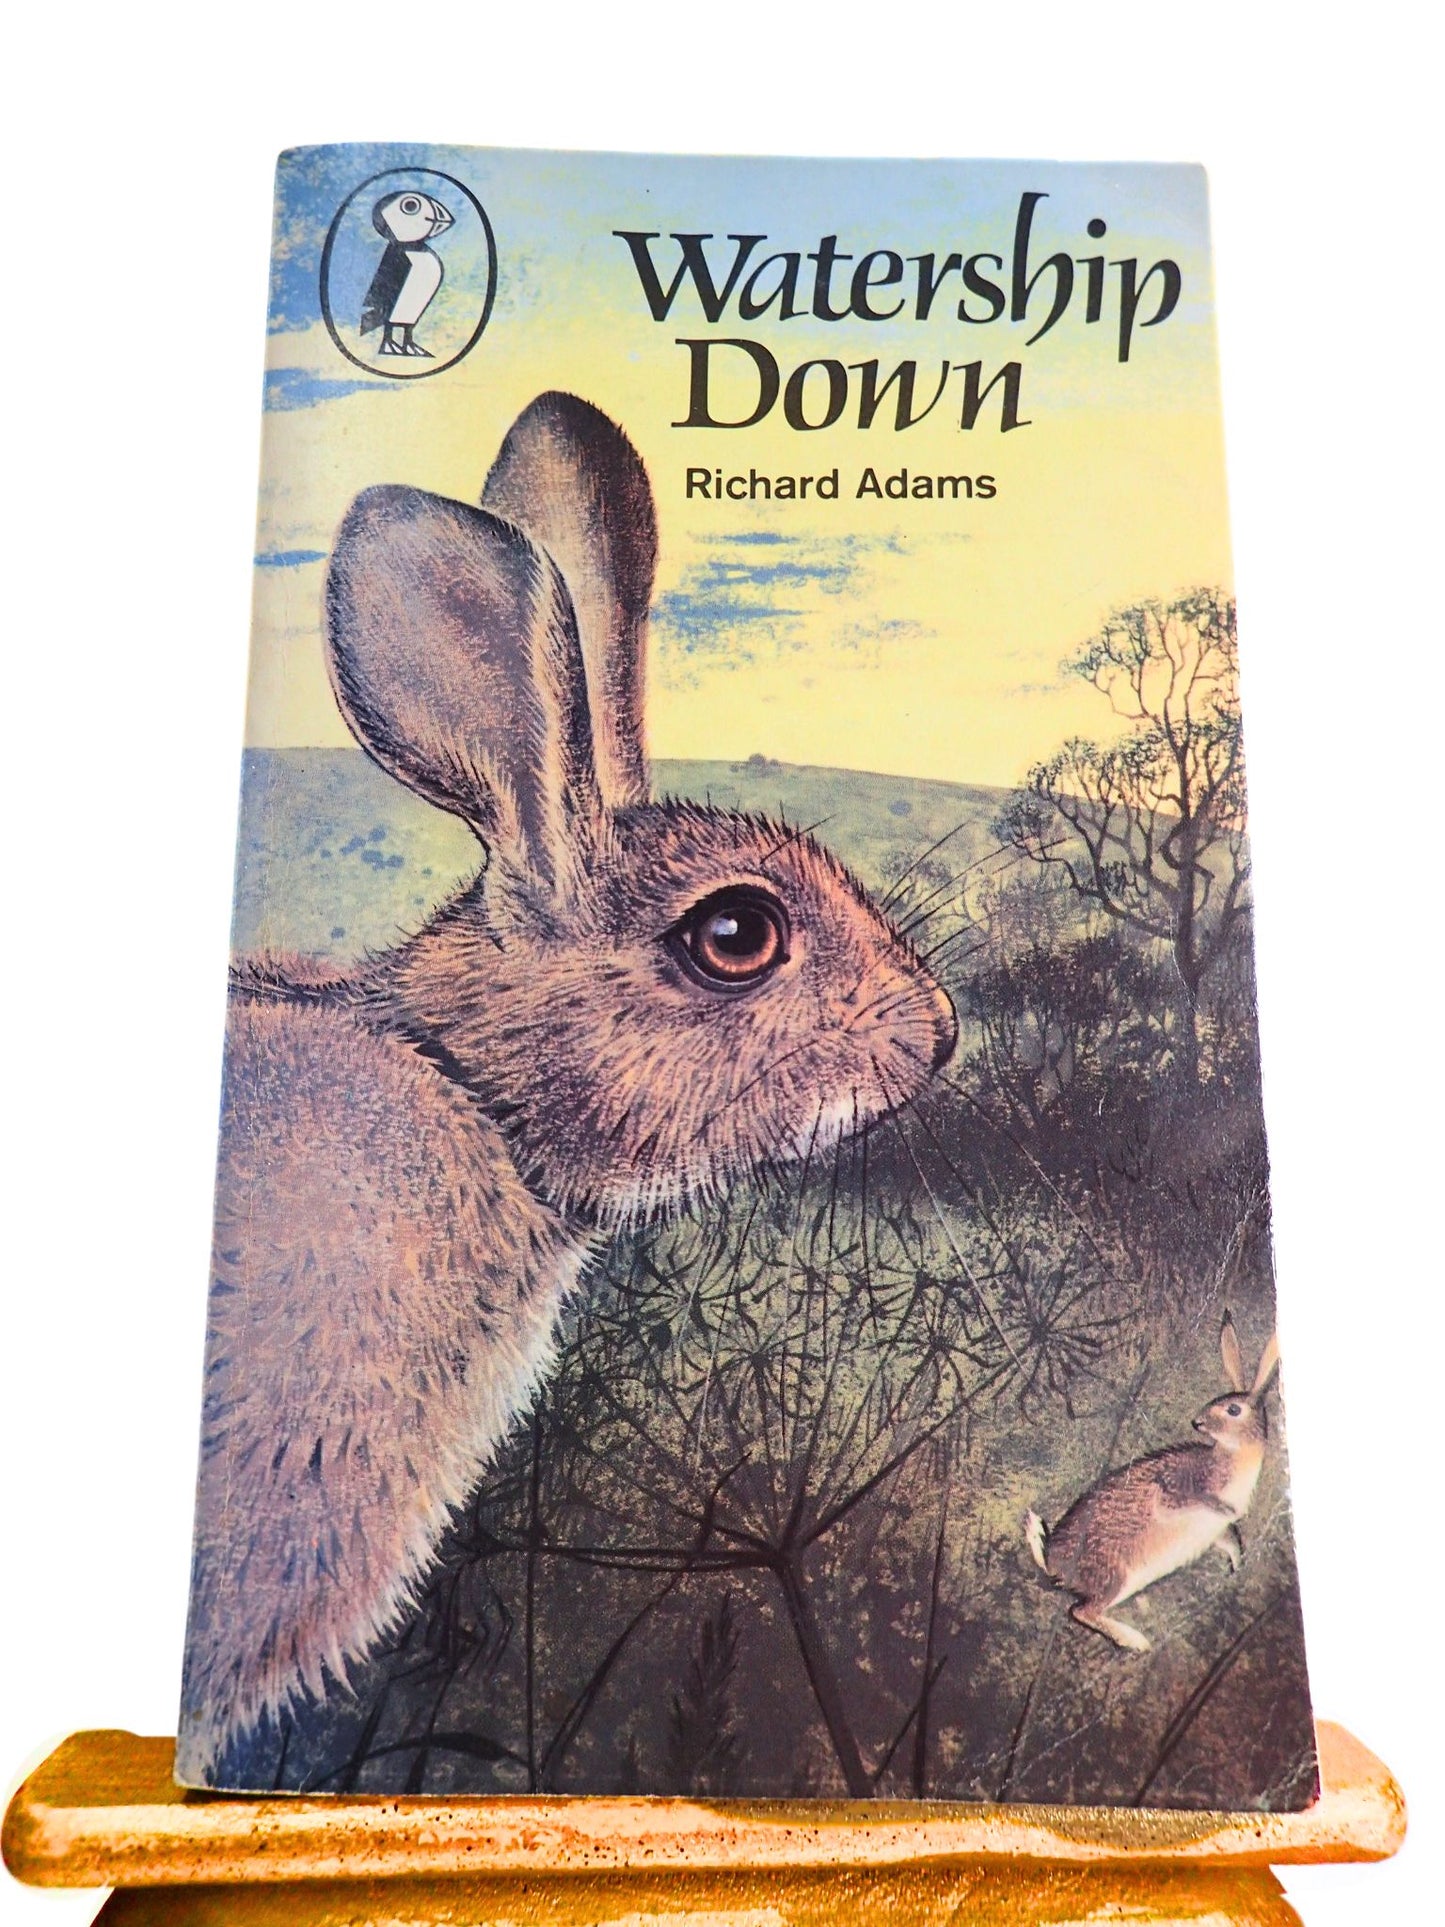 Watership Down by Richard Adams 1970's Vintage Puffin Book Children's lassic